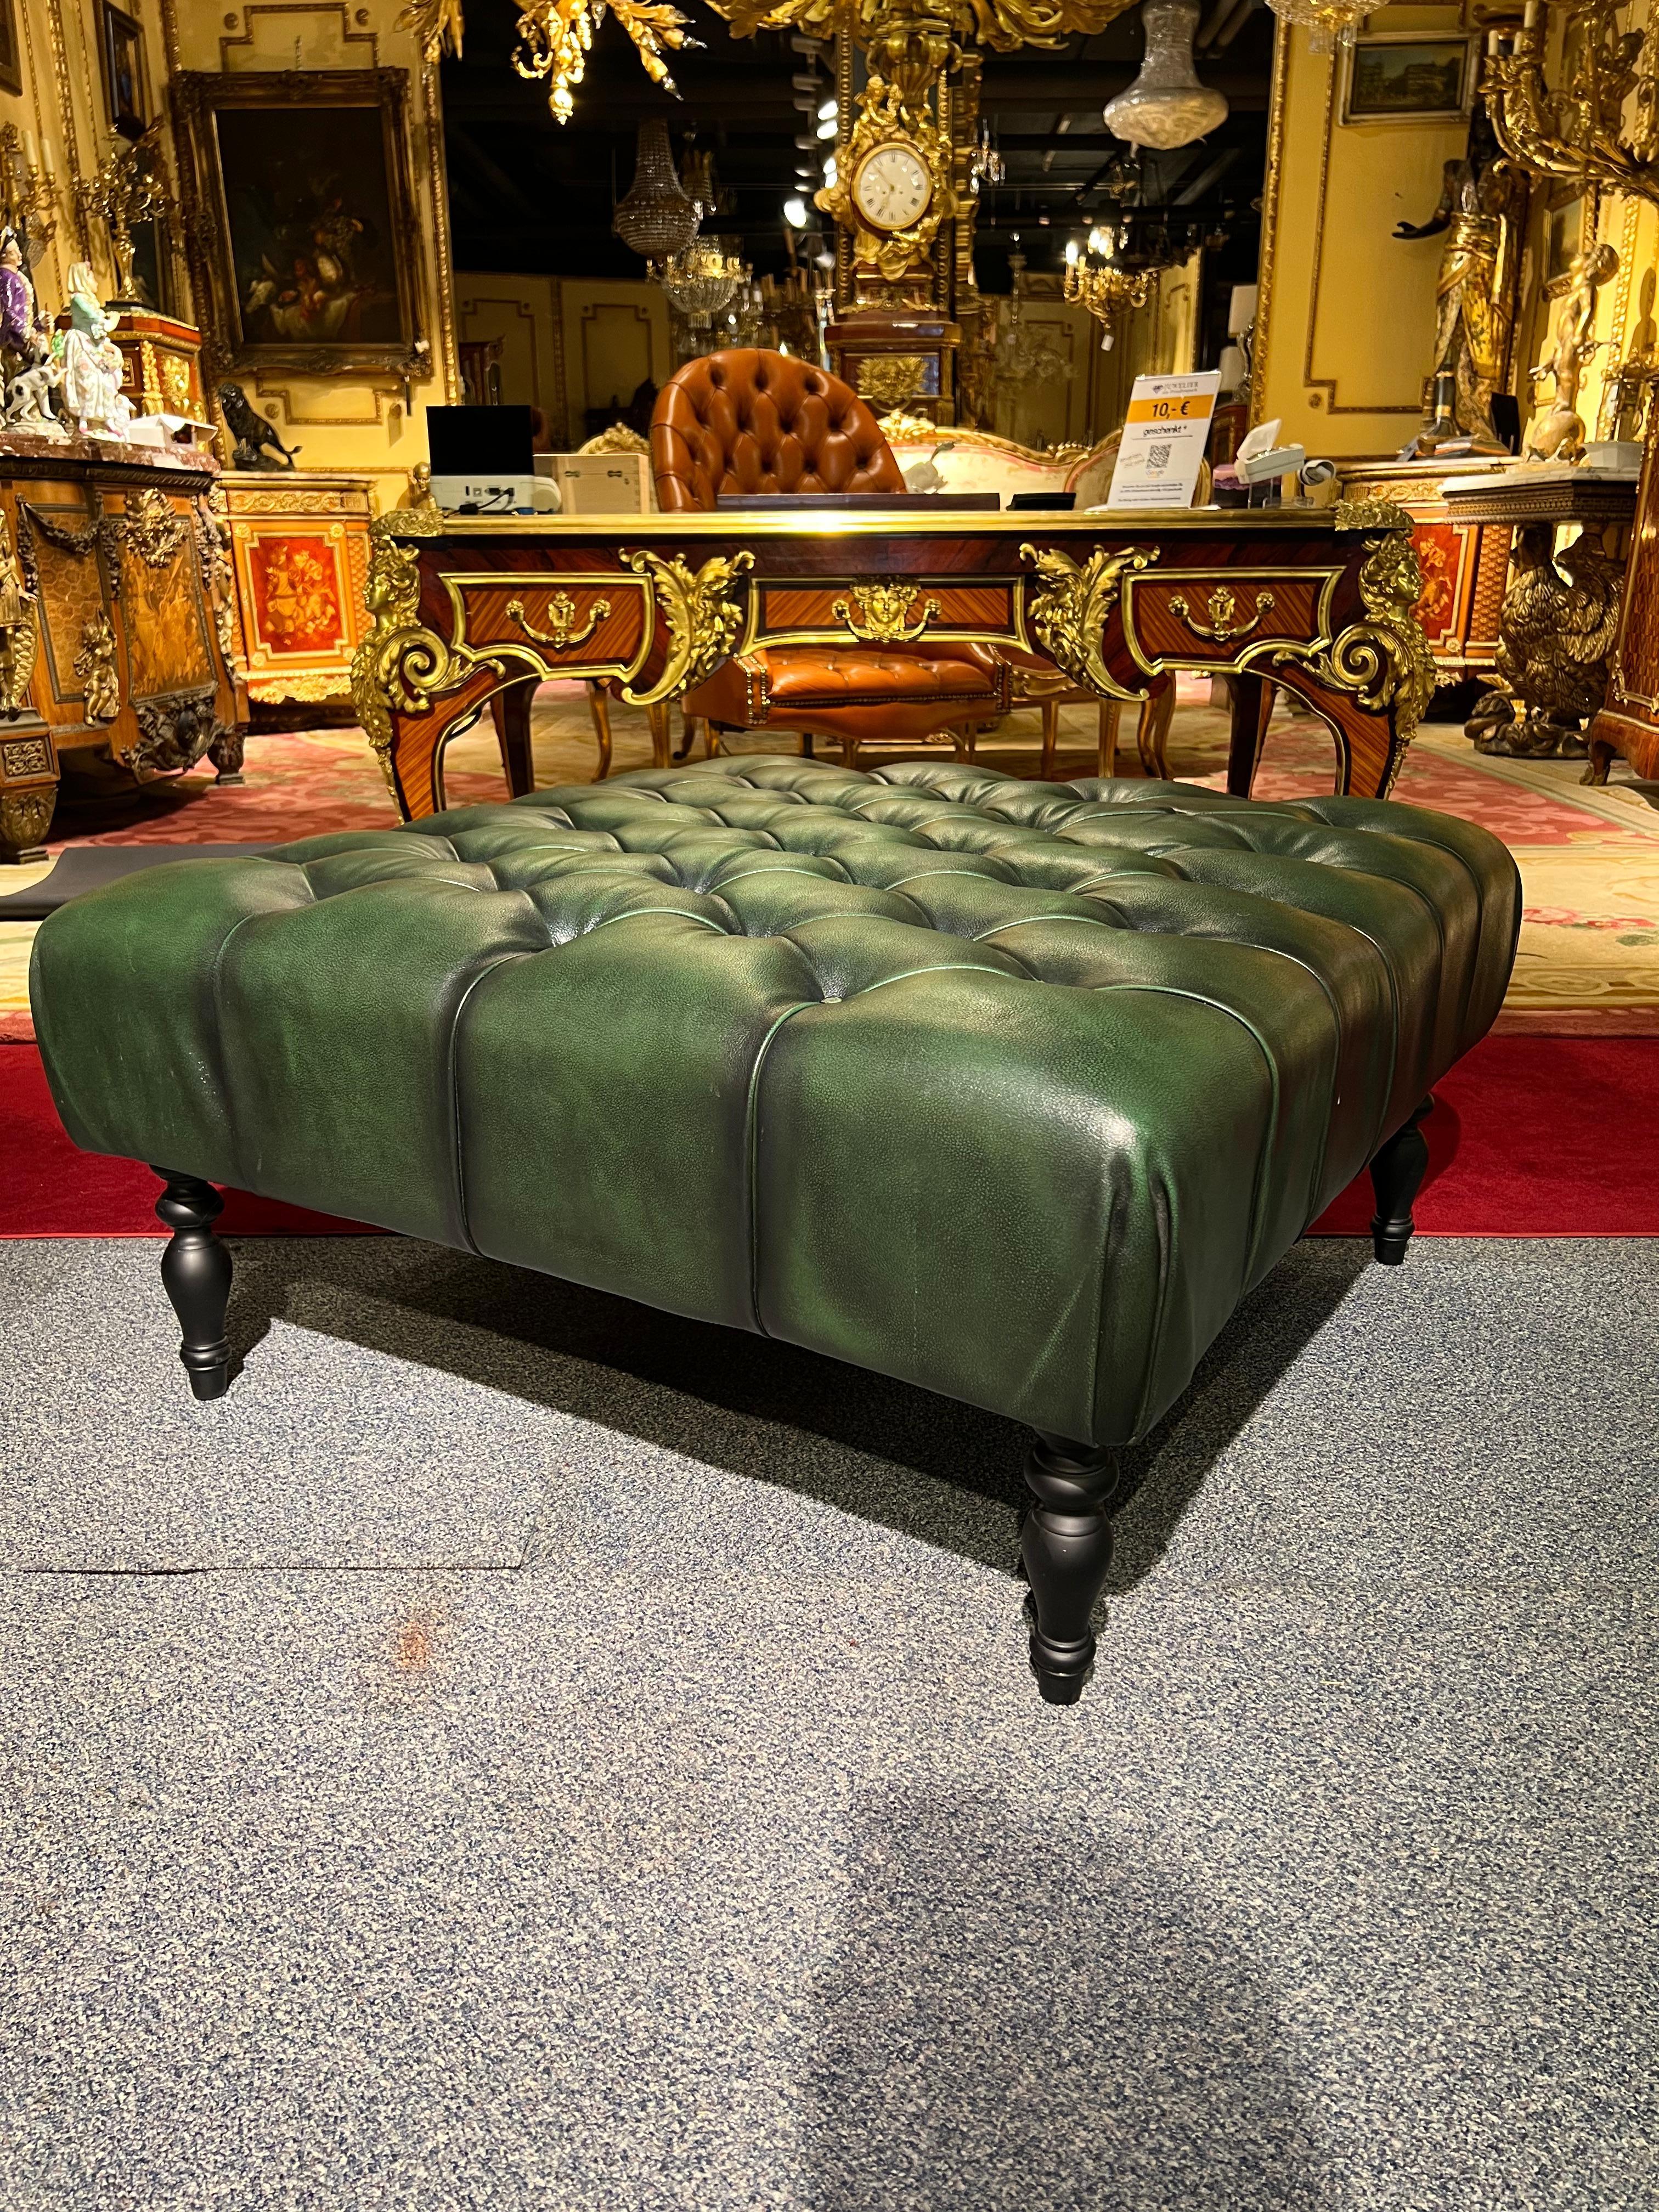 We are delighted to offer for sale this very rare original, large, Chesterfield green leather footstool A very good looking collectable and rare stool, depending on your seating arrangement this could accommodate 8 pairs of feet with ease. The